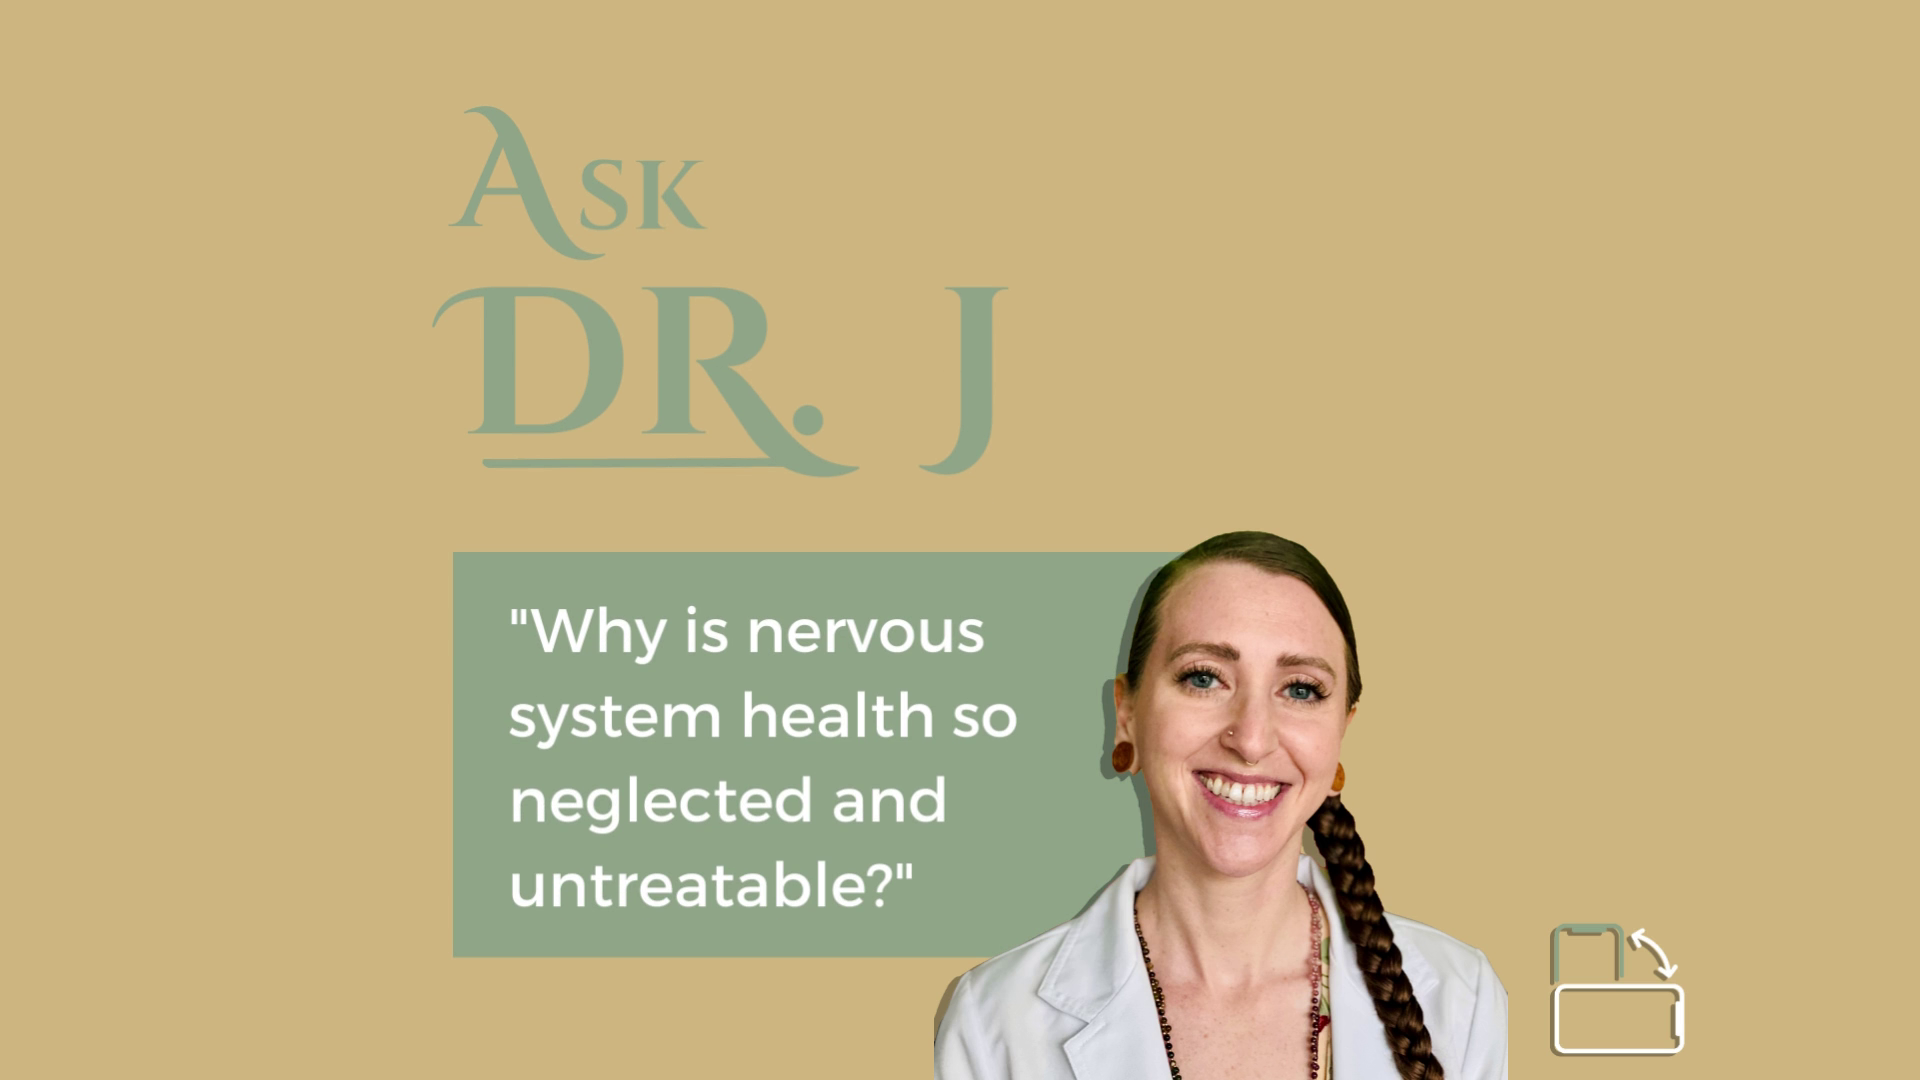 Load video: Why is nervous system health so neglected and untreatable?